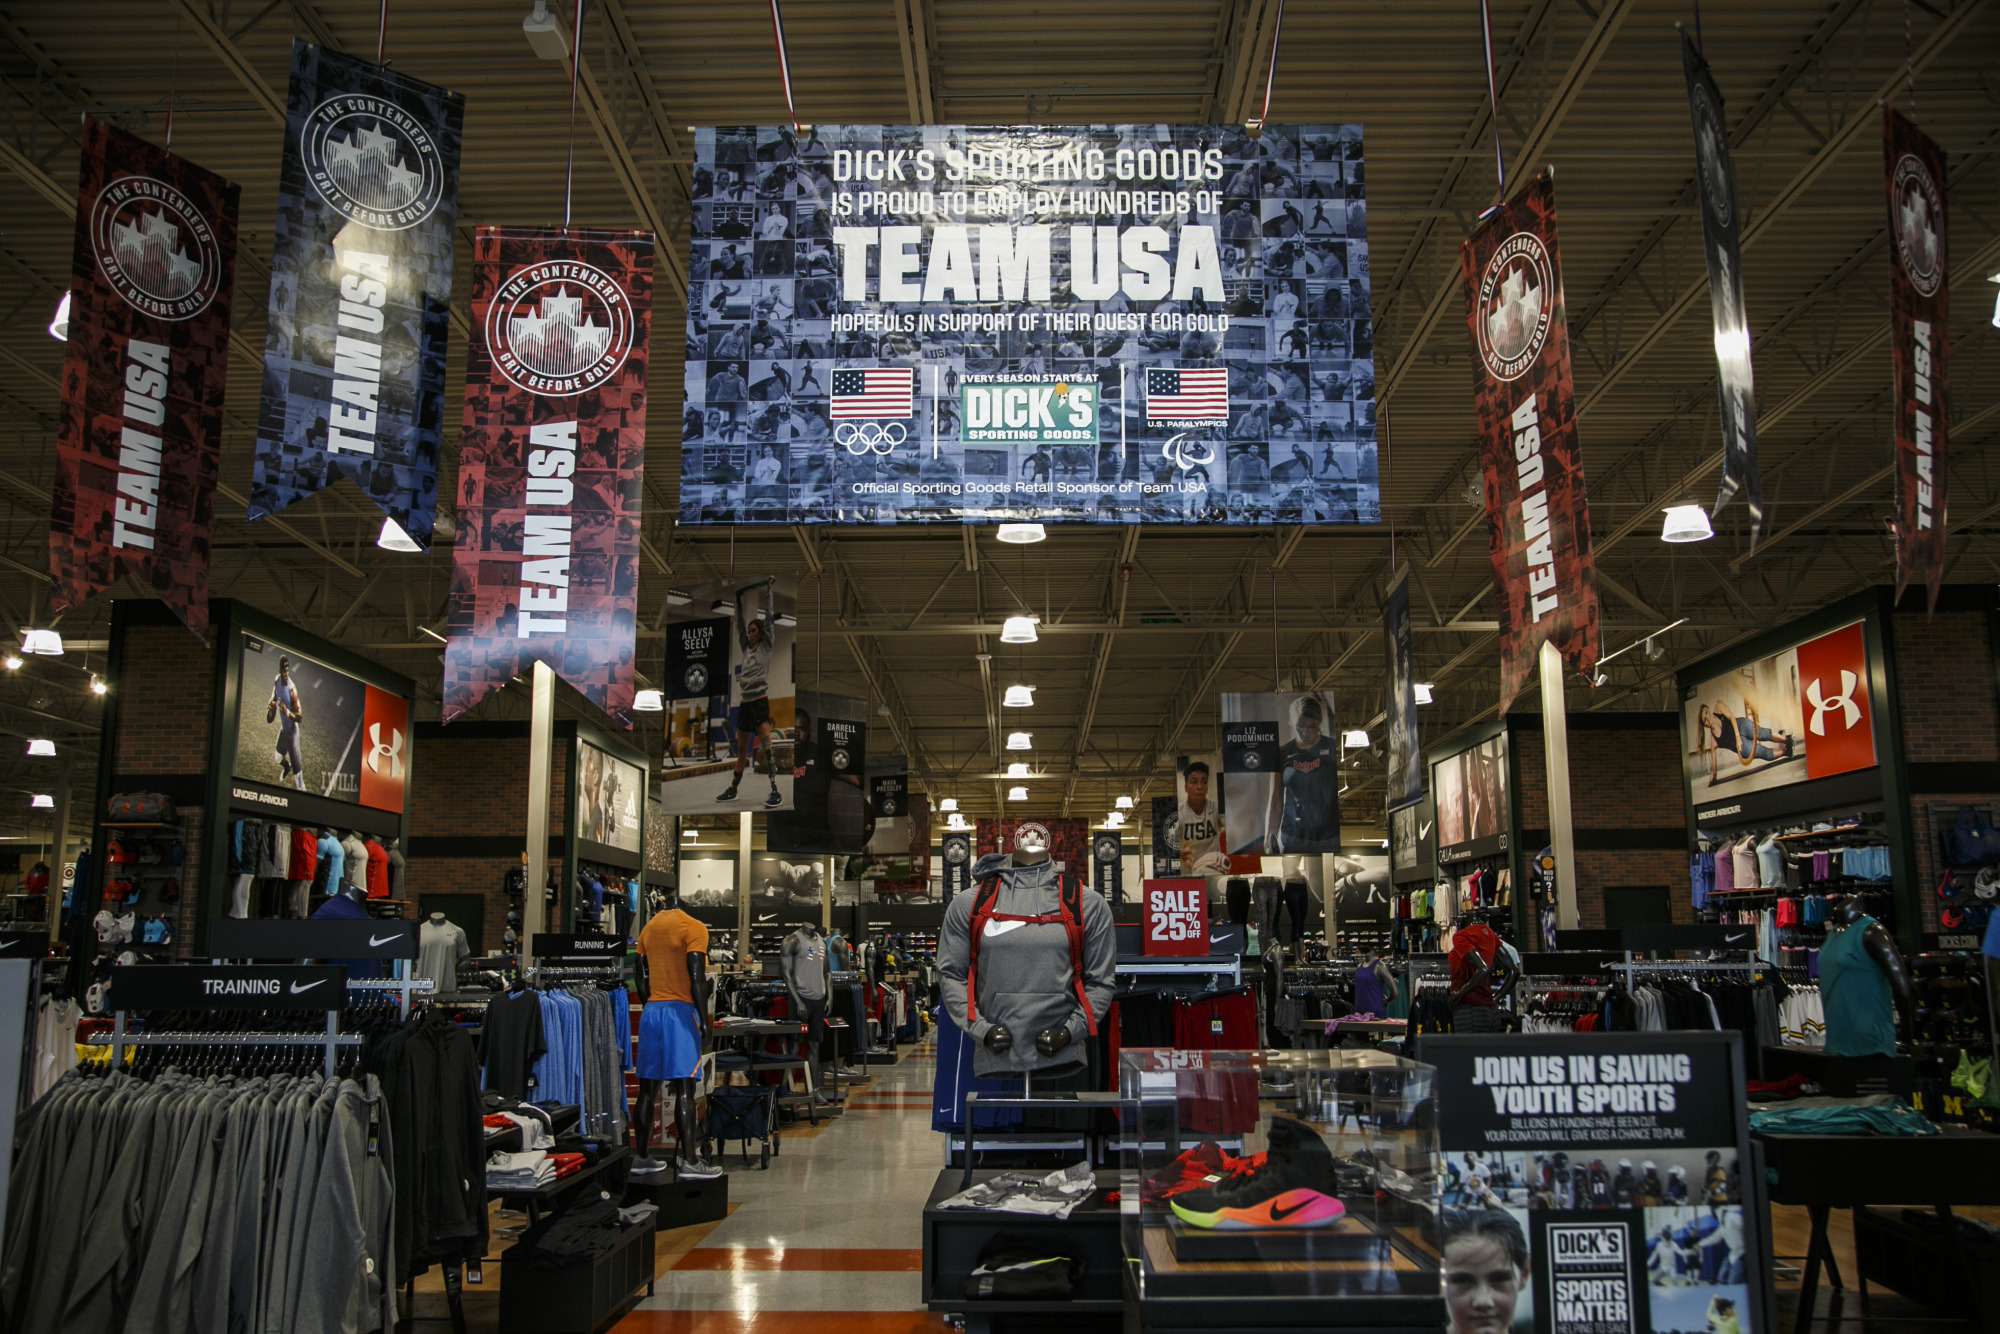 Dick's Sporting Goods to End Team USA Olympics Sponsorship - Bloomberg